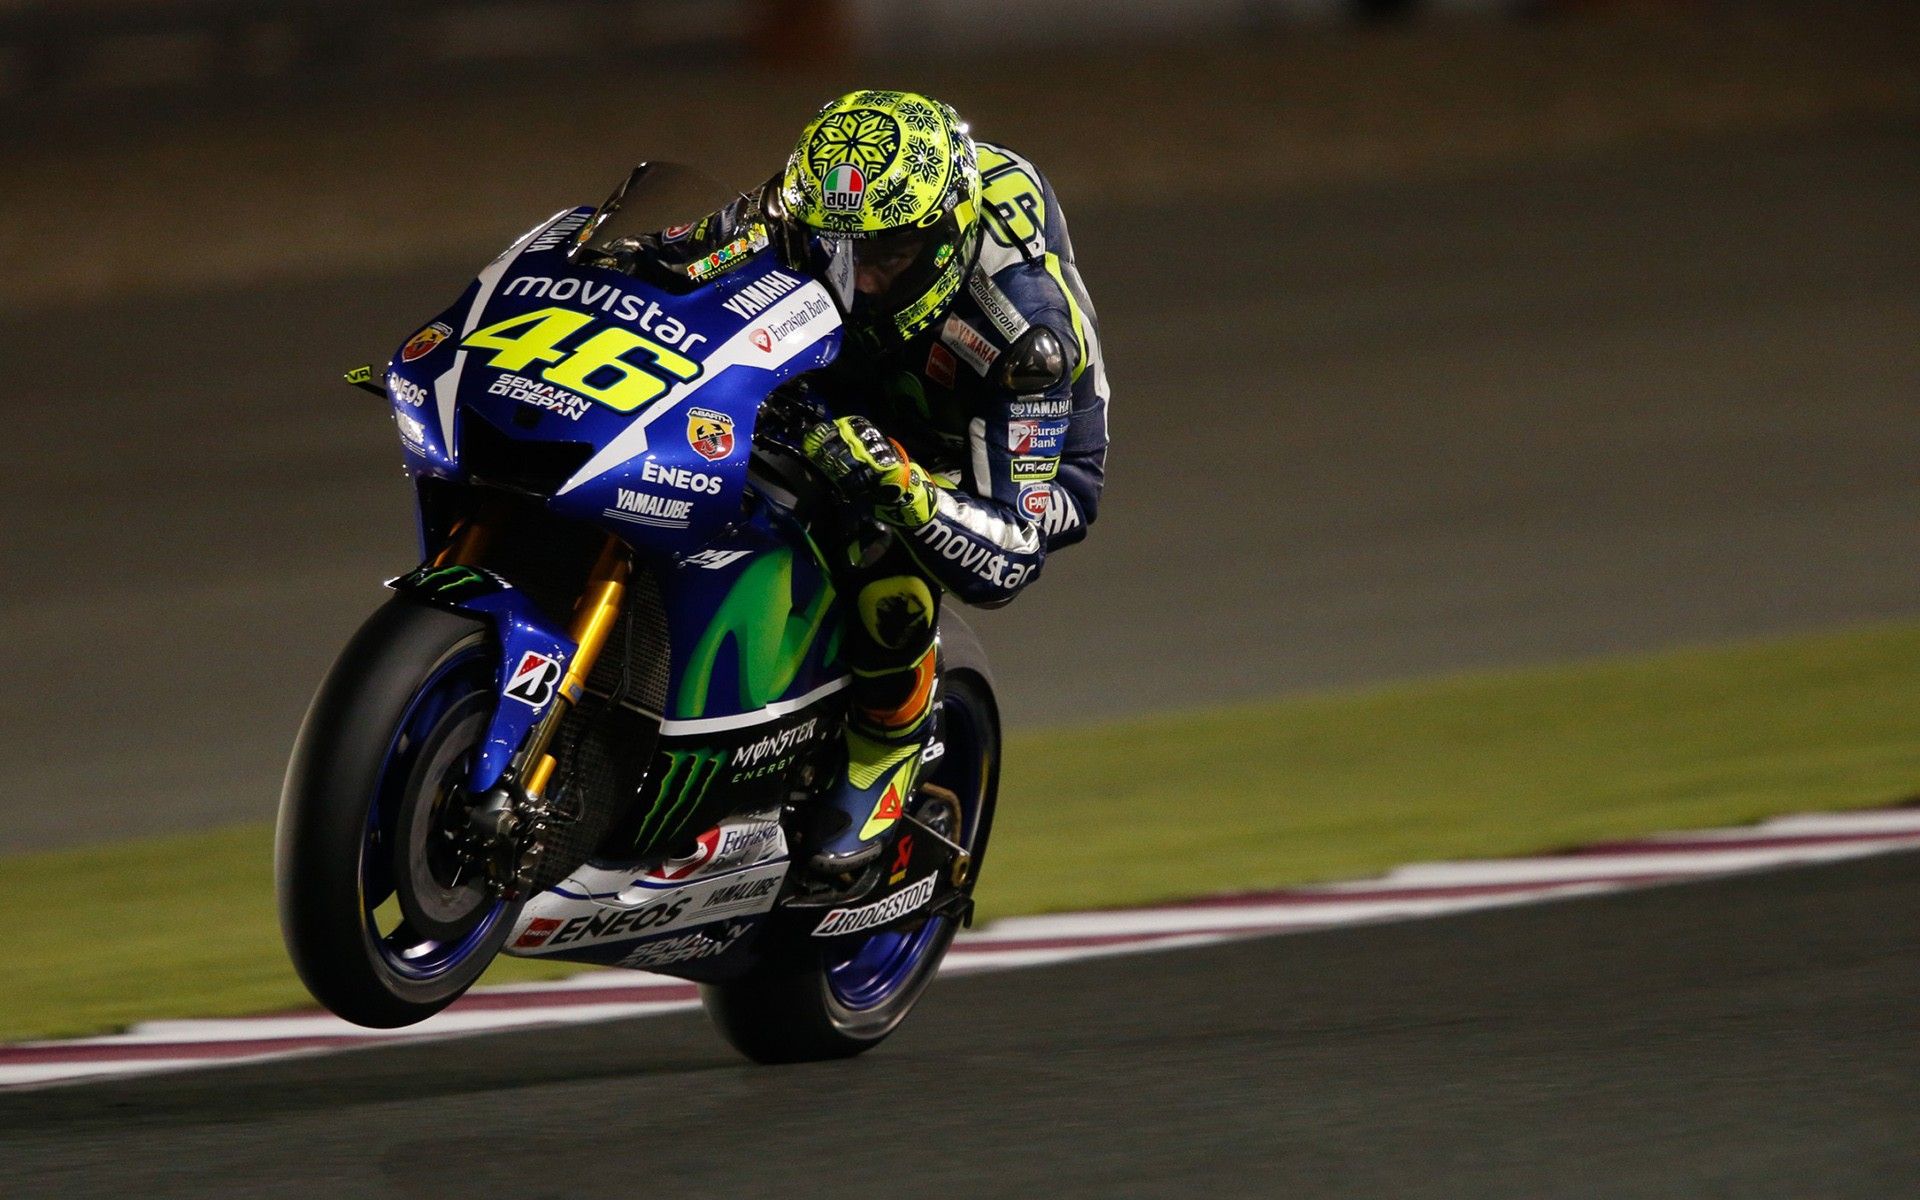 Valentino Rossi Wallpapers Group (77+)